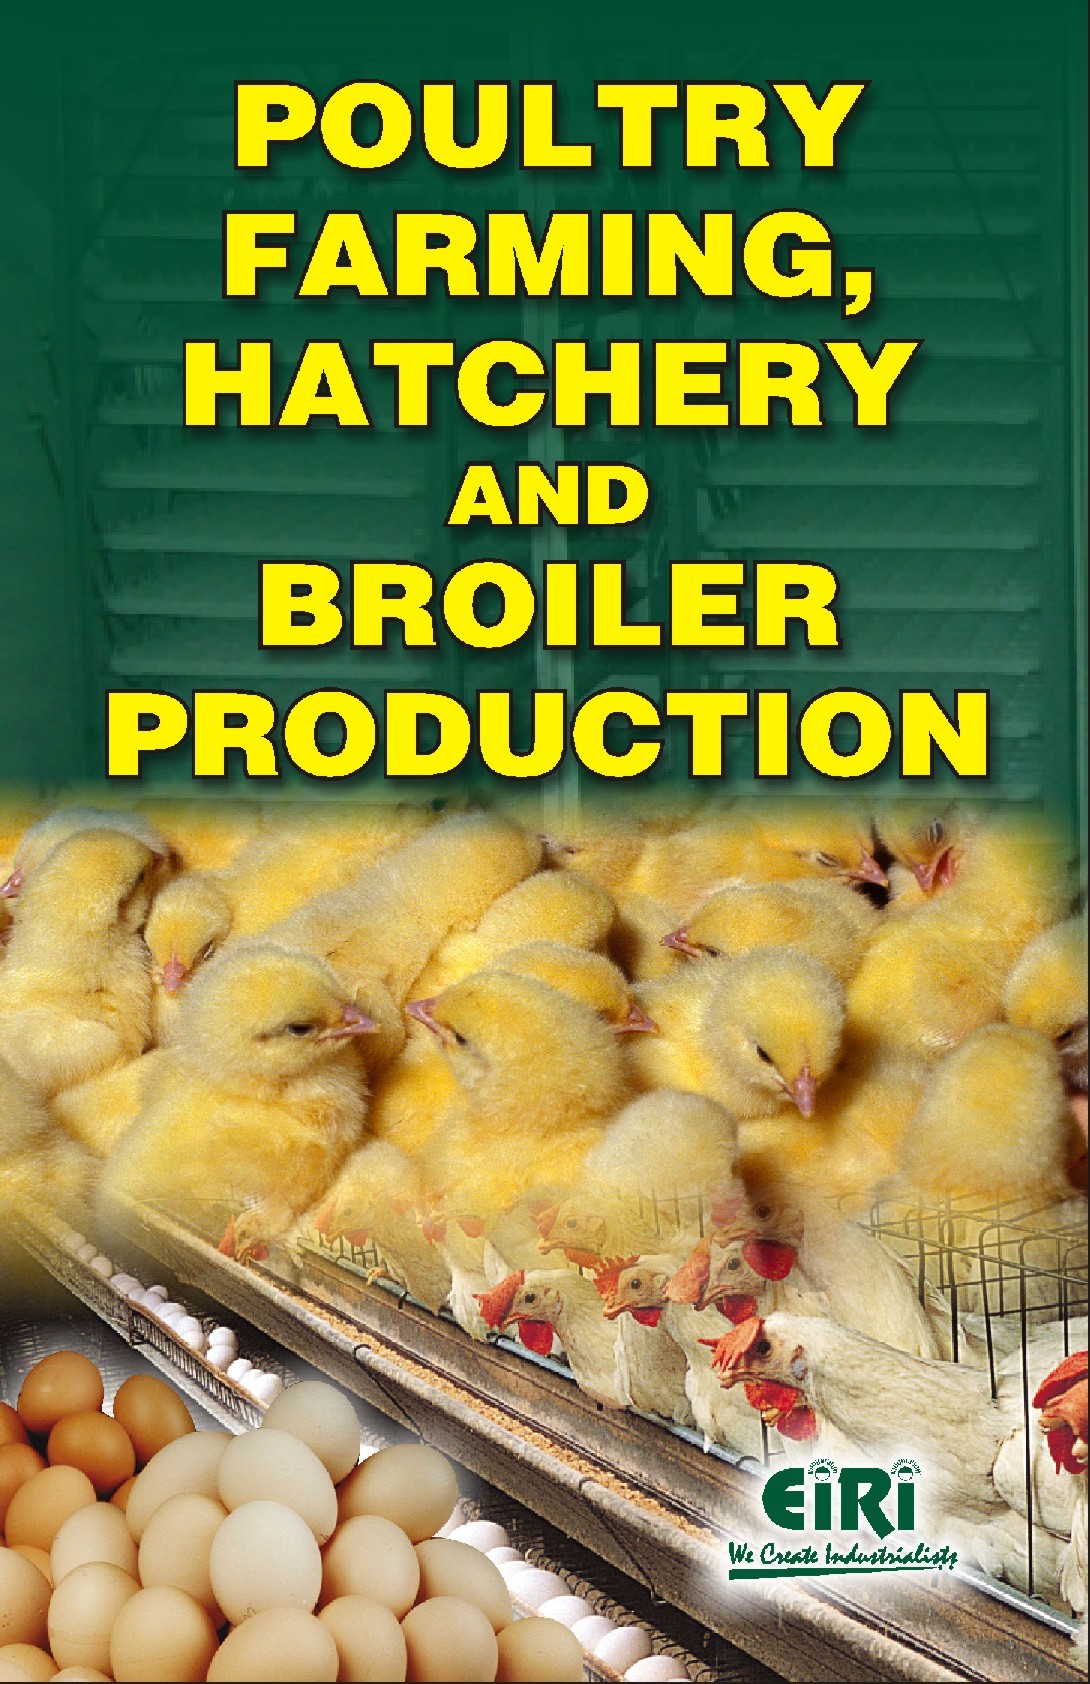 Hatchery and Broiler Production book